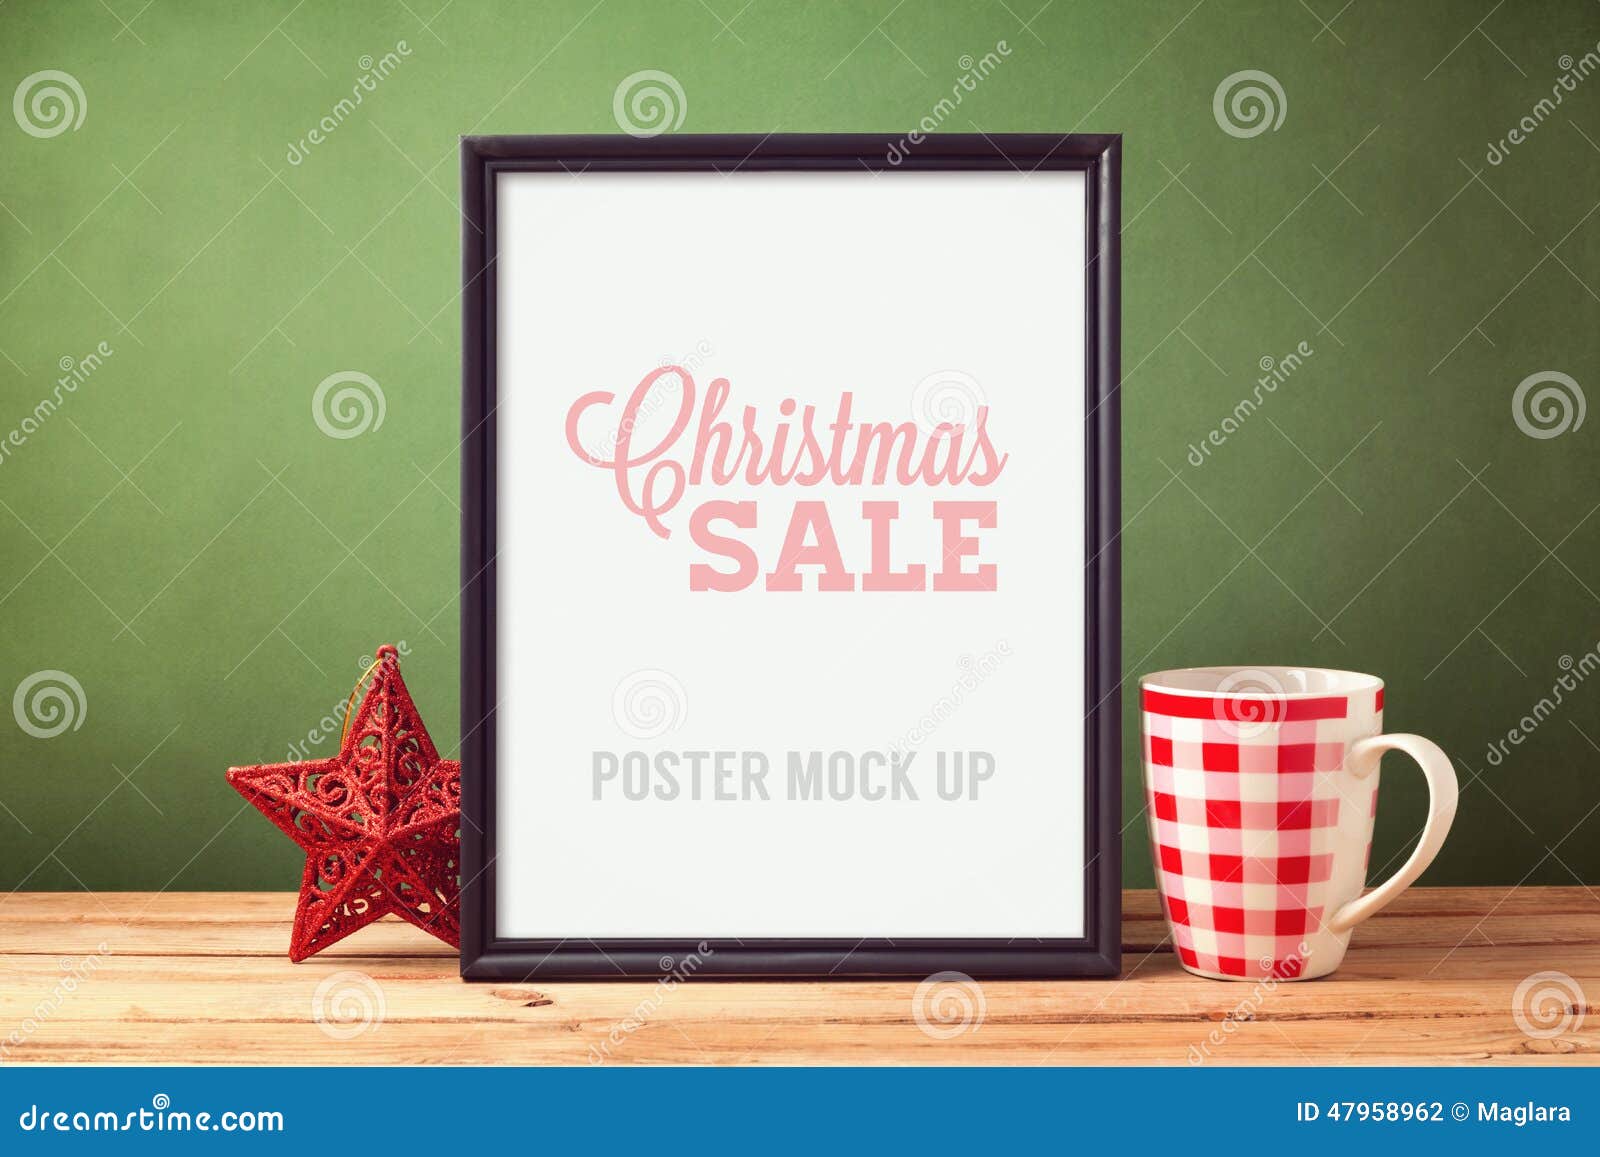 Poster mock up template for Christmas